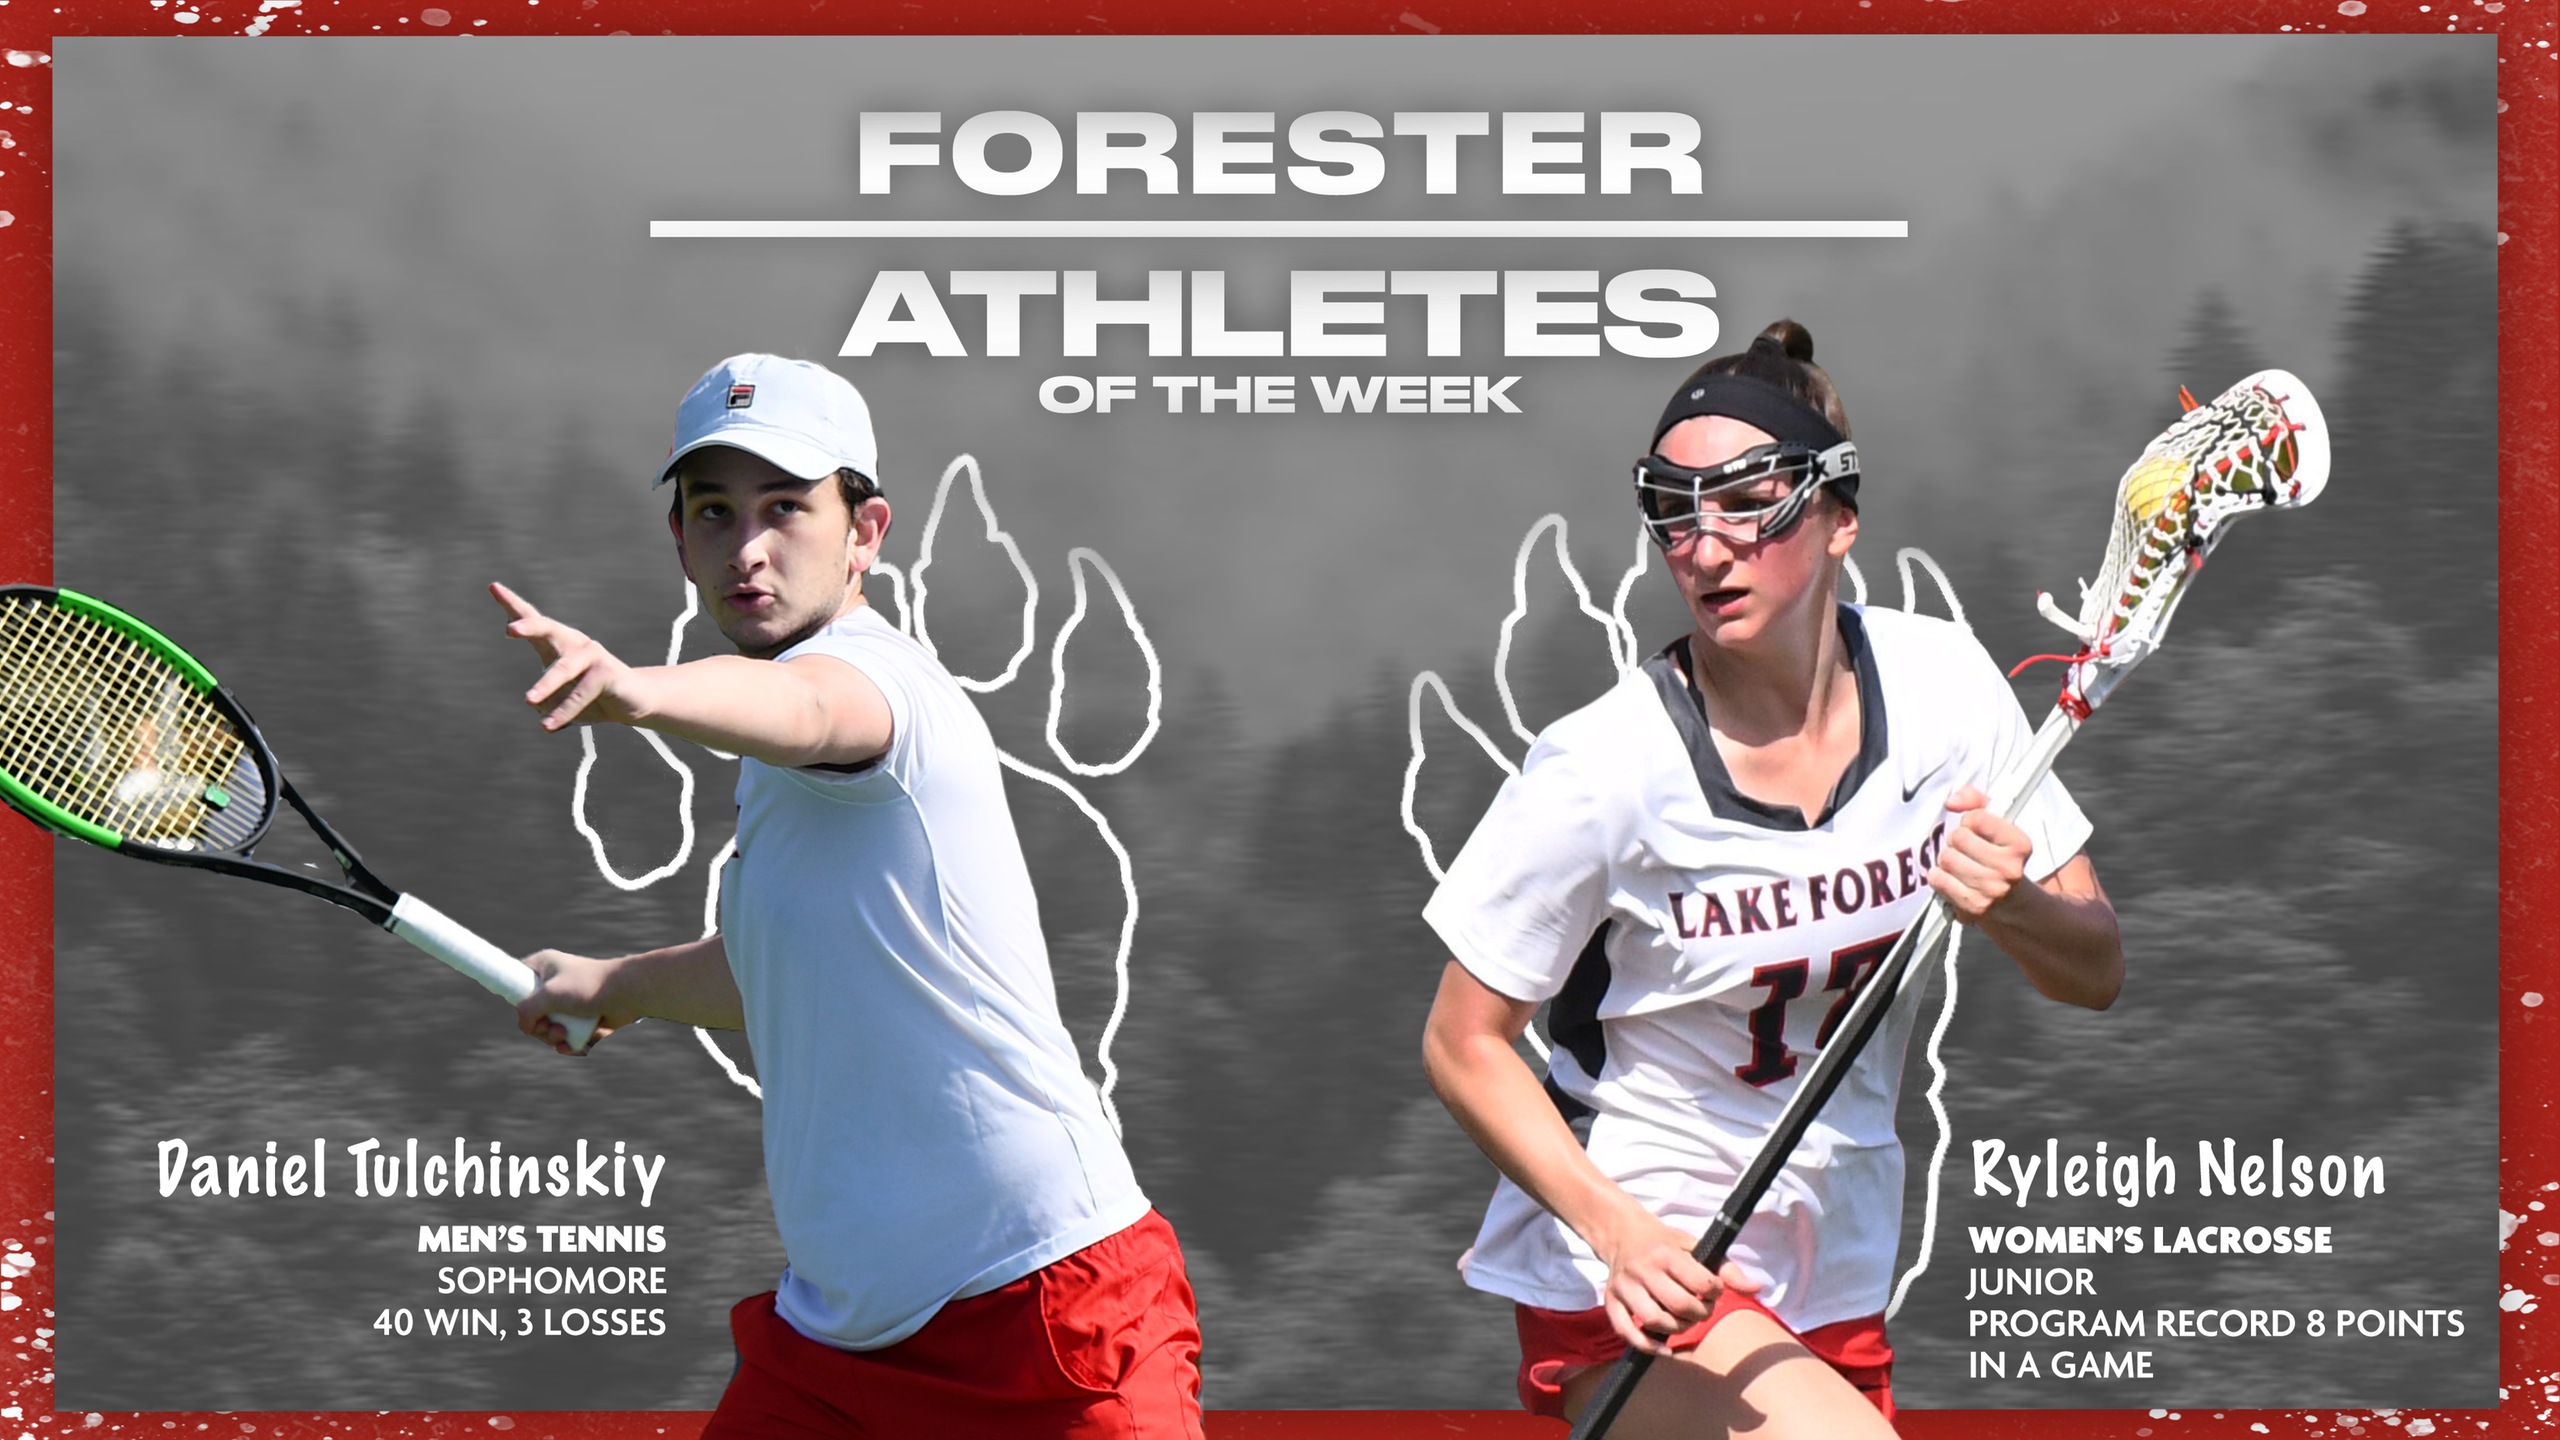 Forester Athletes of the Week: April 25